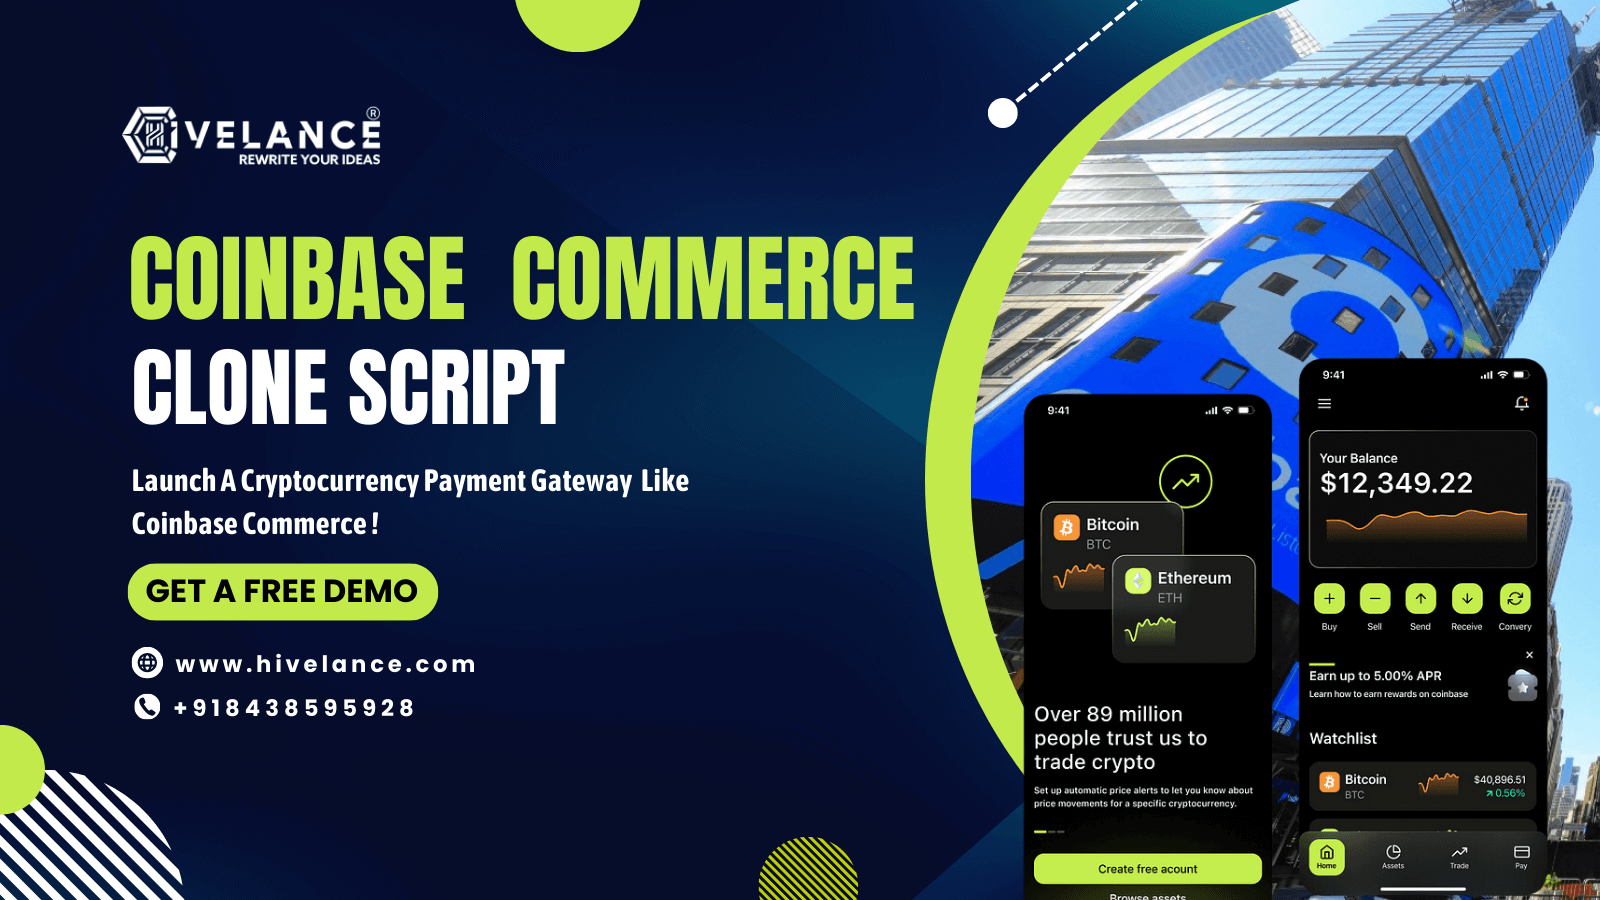 Coinbase Commerce Clone: Launch A Cryptocurrency Payment Gateway Like Coinbase Commerce